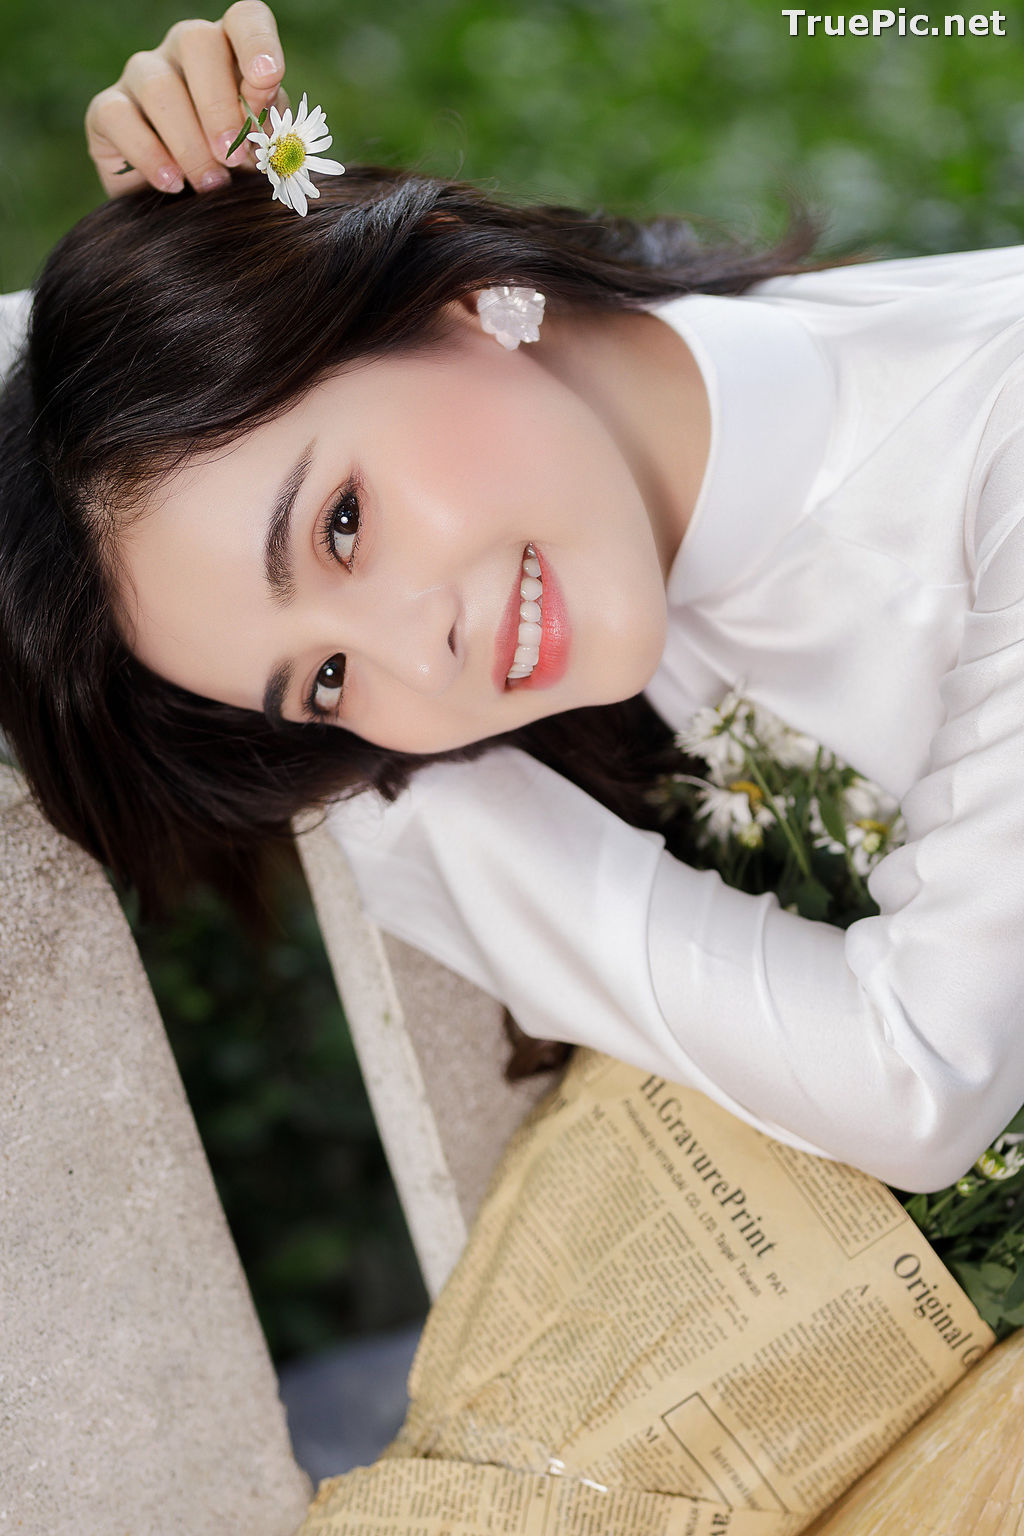 Image The Beauty of Vietnamese Girls with Traditional Dress (Ao Dai) #4 - TruePic.net - Picture-42